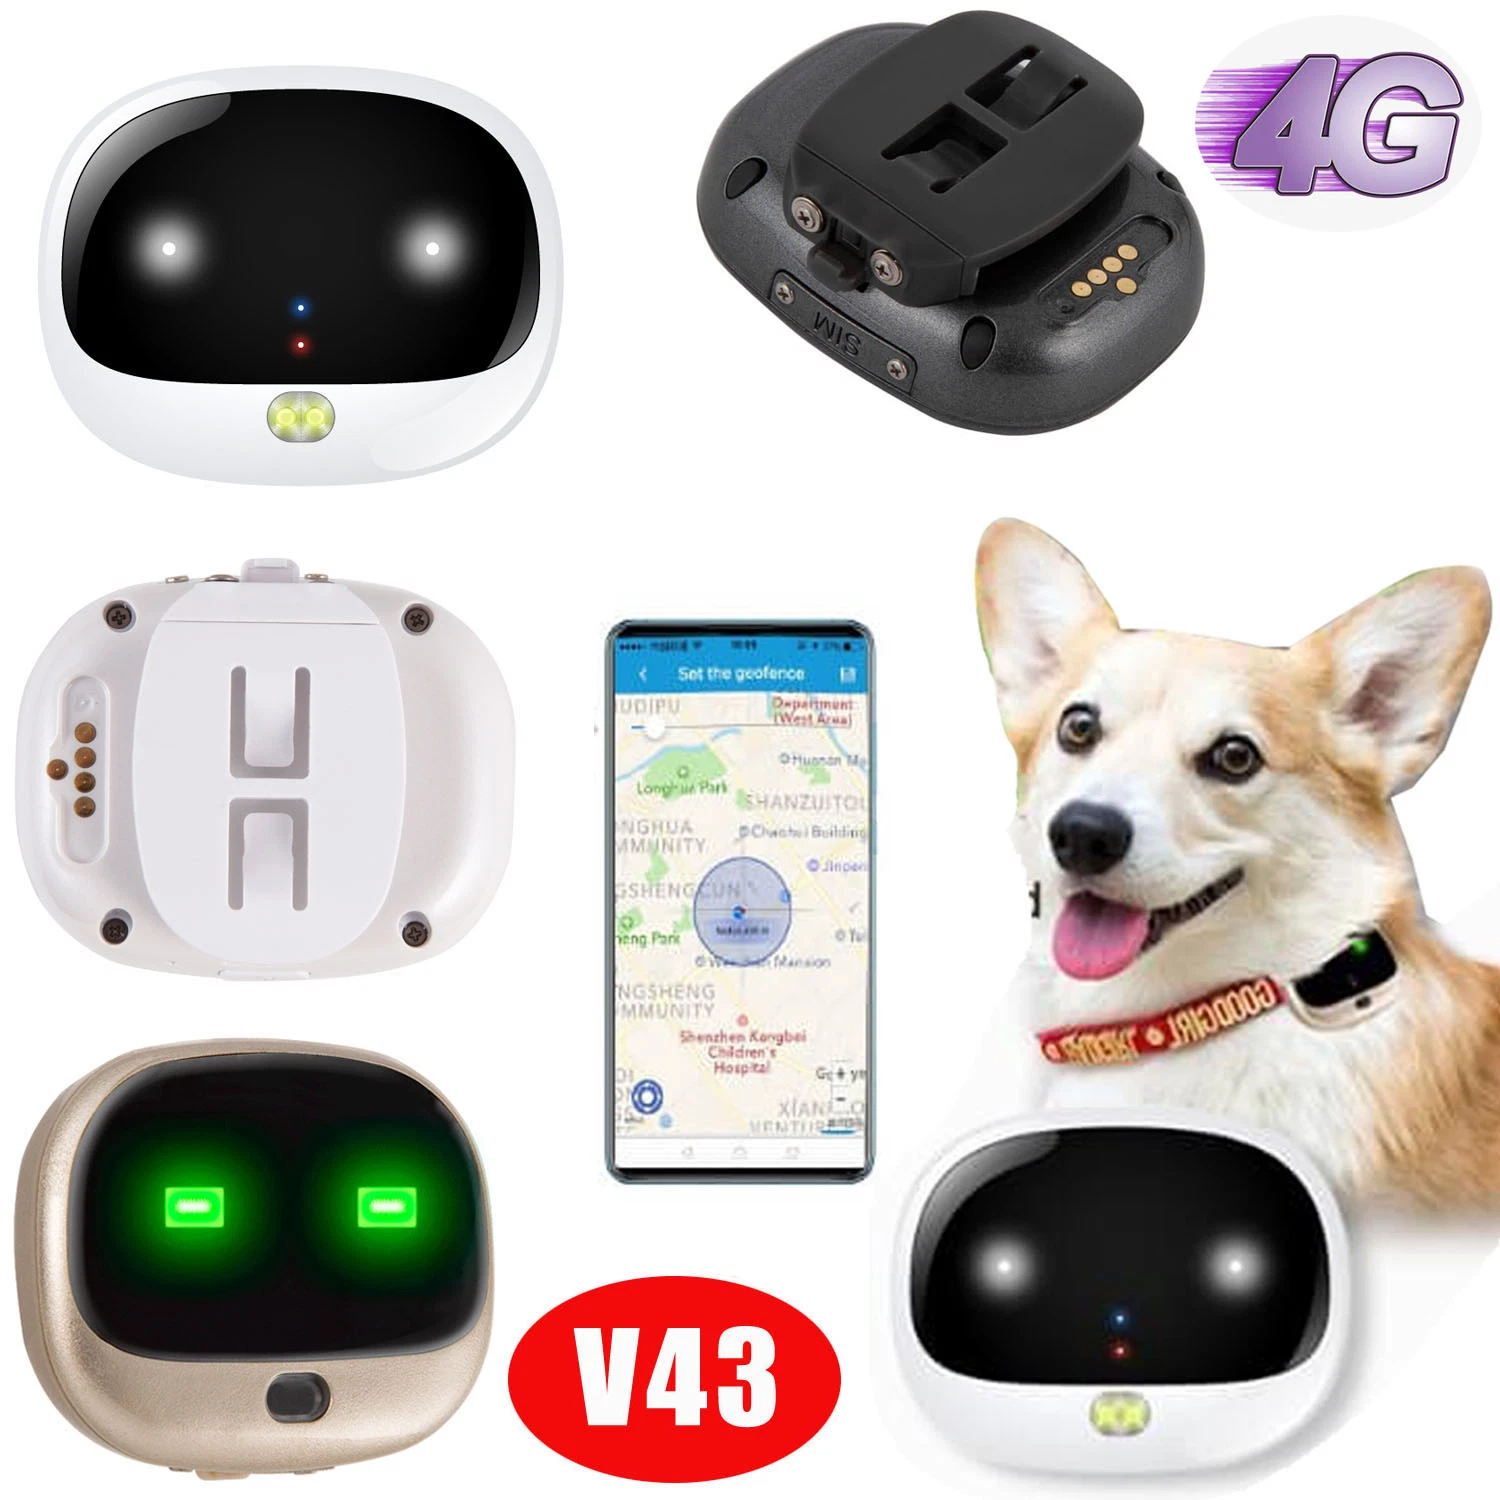 China Factory Supply 4G LTE Waterproof IP67 safety GPS Pets Tracking Device with Smart LED Light V43